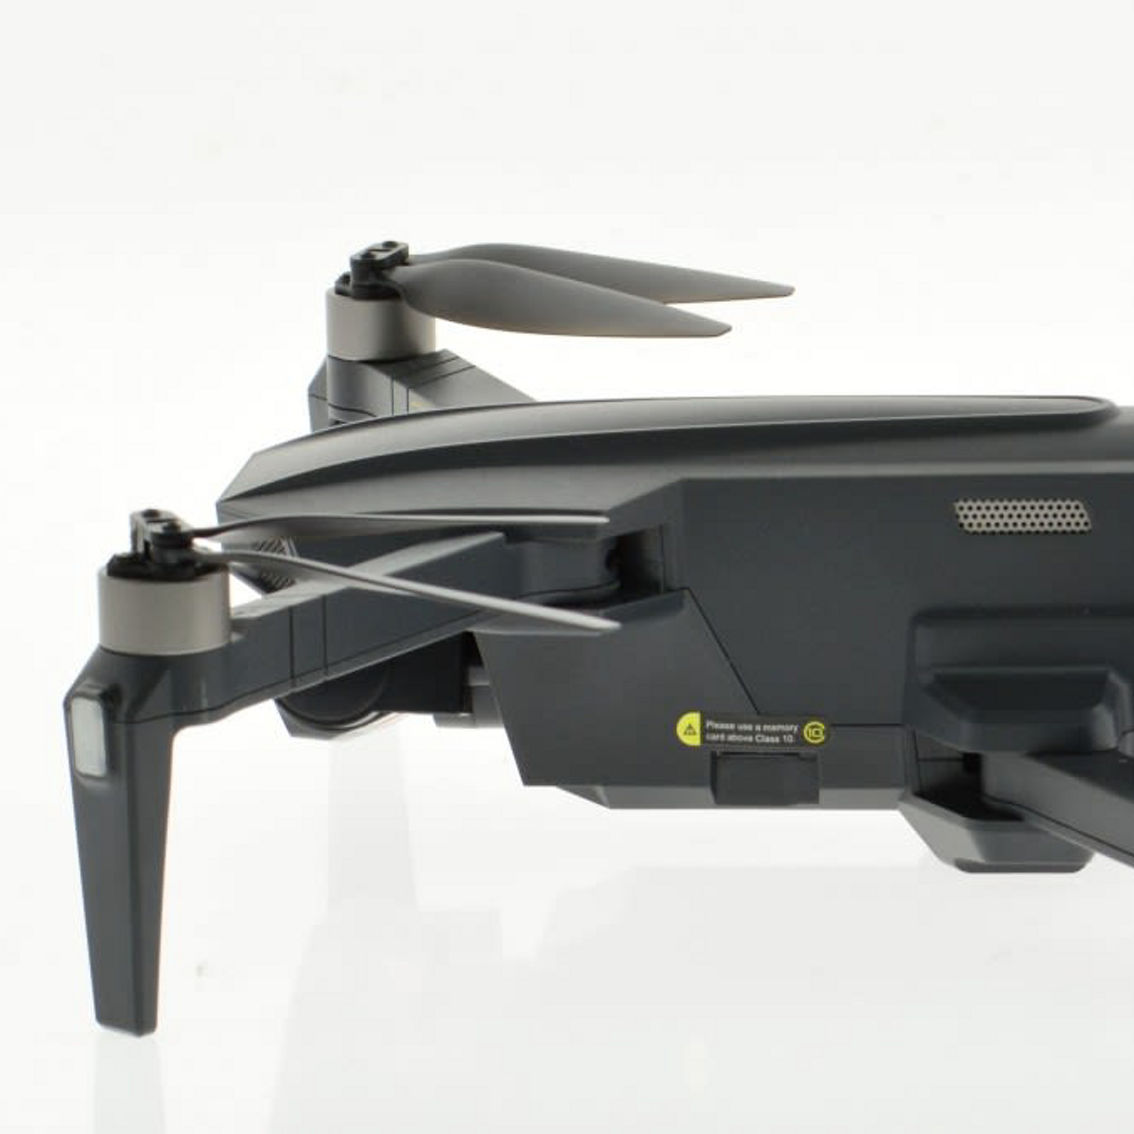 CIS-MP1-4k-EIS medium foldable GPS drone with 4k EIS camera and 2 axis gimbal - Image 5 of 5